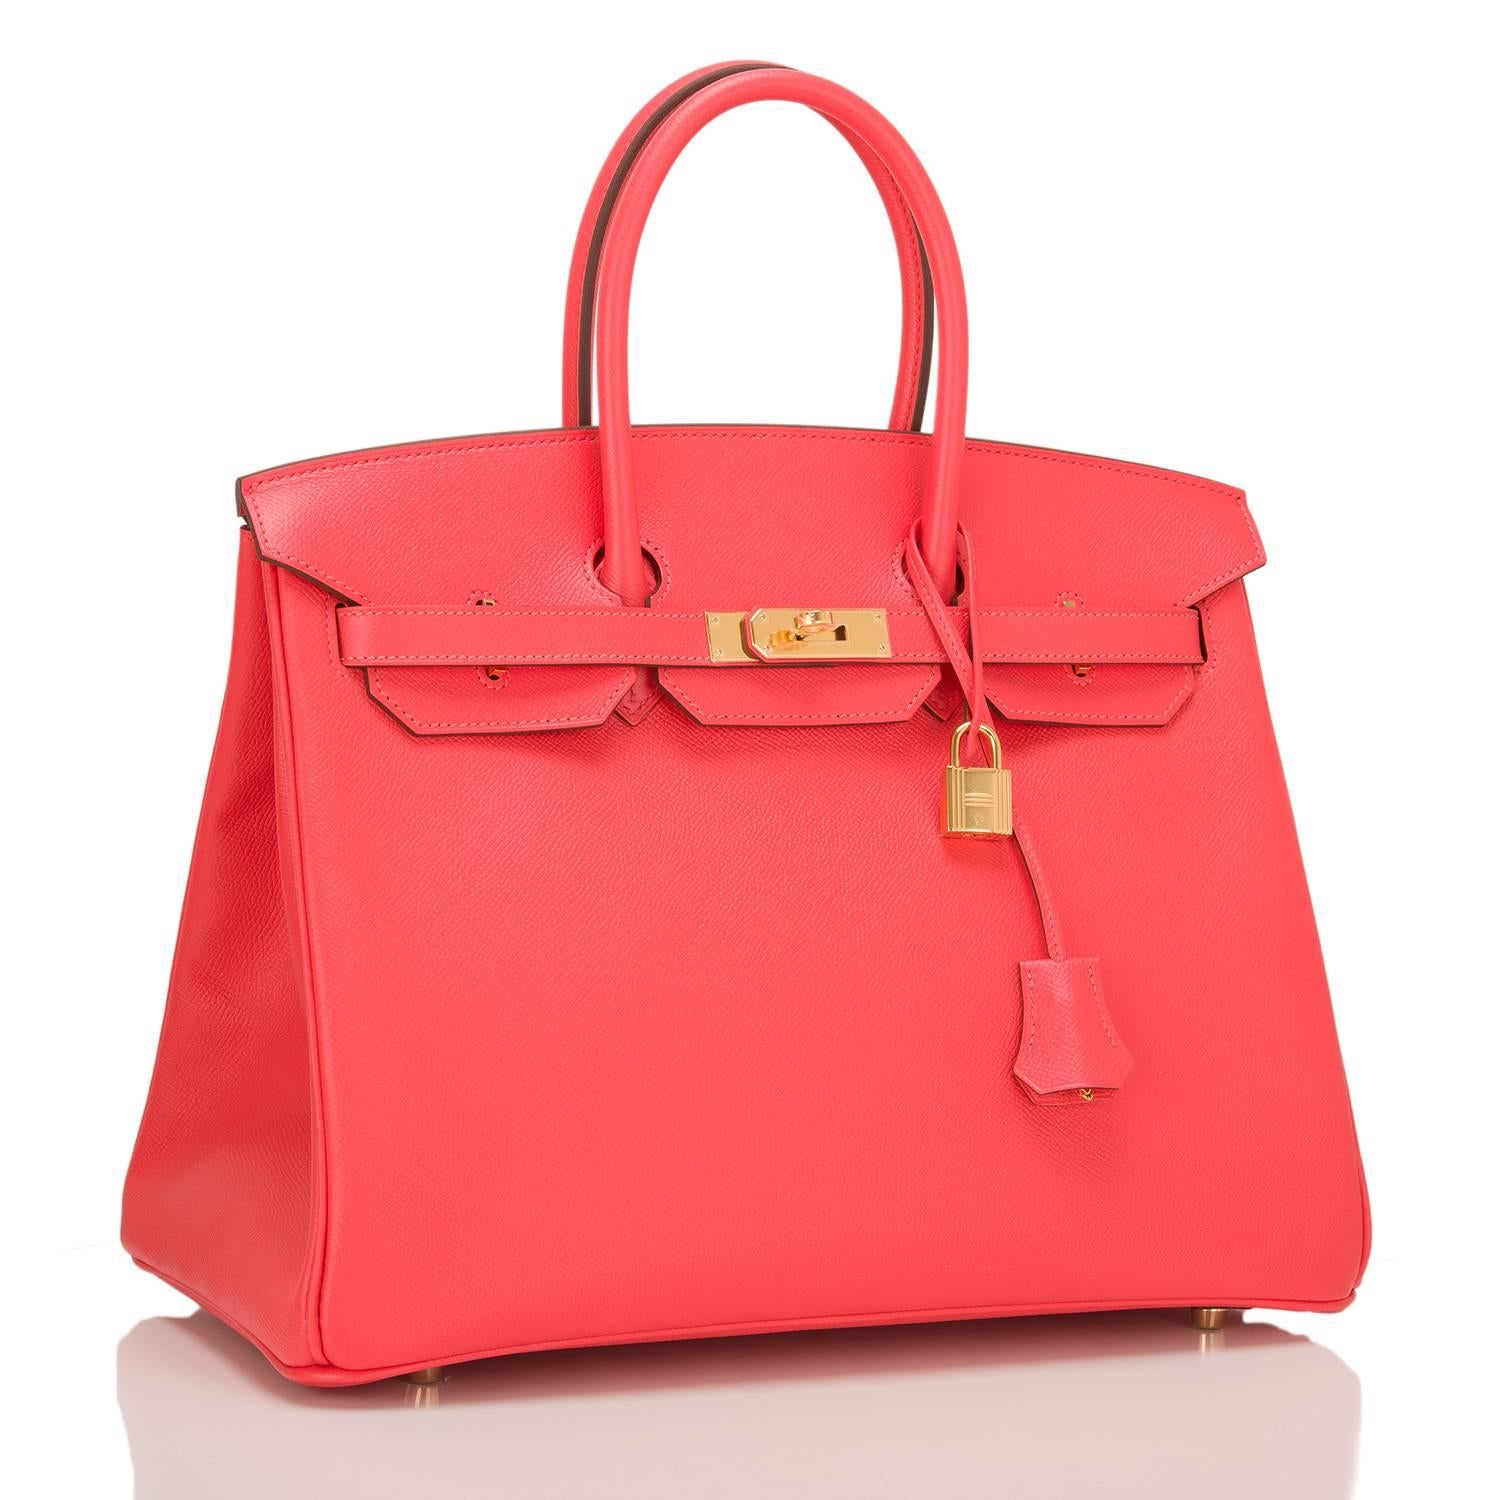 This Hermes Rose Jaipur 35cm in epsom leather with gold hardware.

This Birkin features tonal stitching, front toggle closure, clochette with lock and two keys, and double rolled handles. The interior is lined in Rose Jaipur chevre with one zip